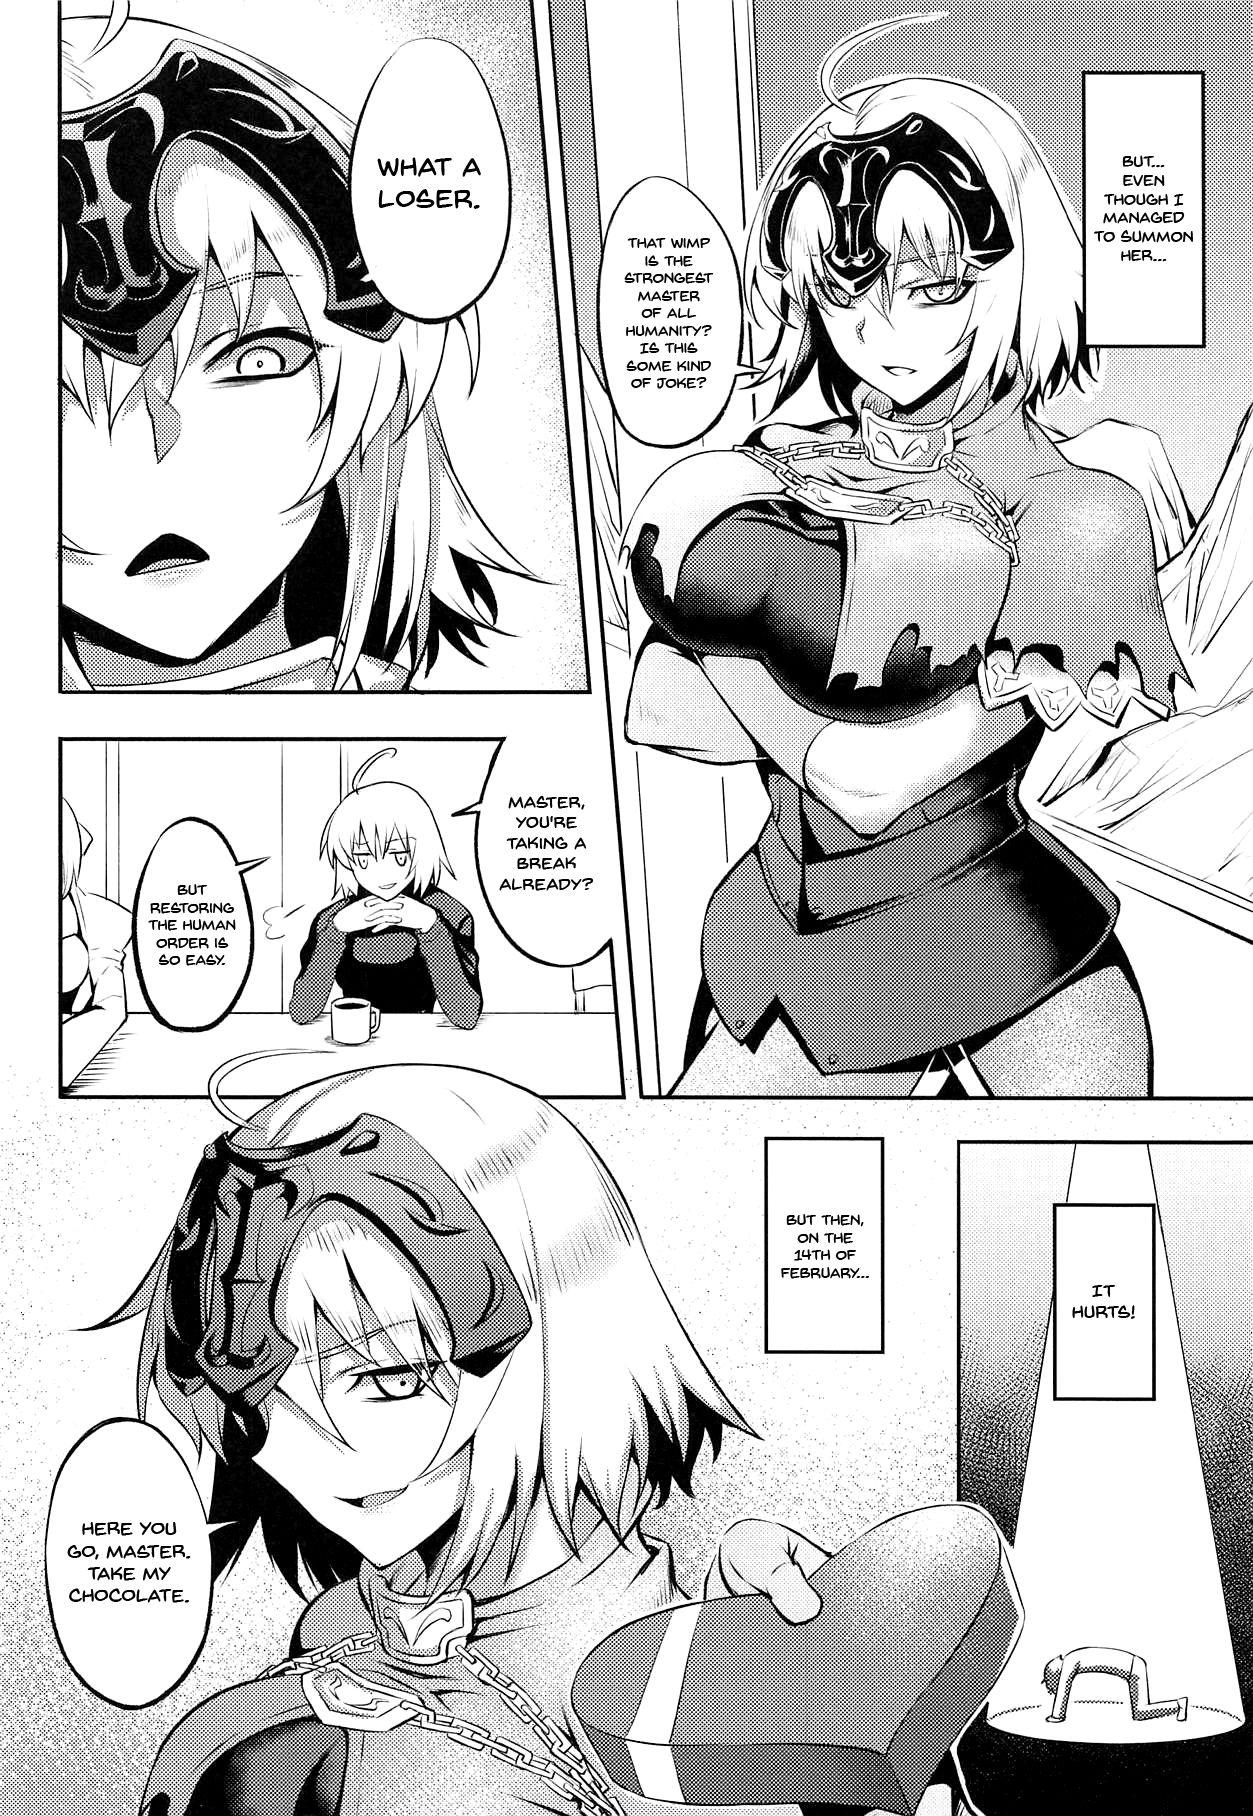 Russian Sugao no Mama no Kimi de Ite | Together With You Showing Her True Face - Fate grand order Gay Facial - Page 4